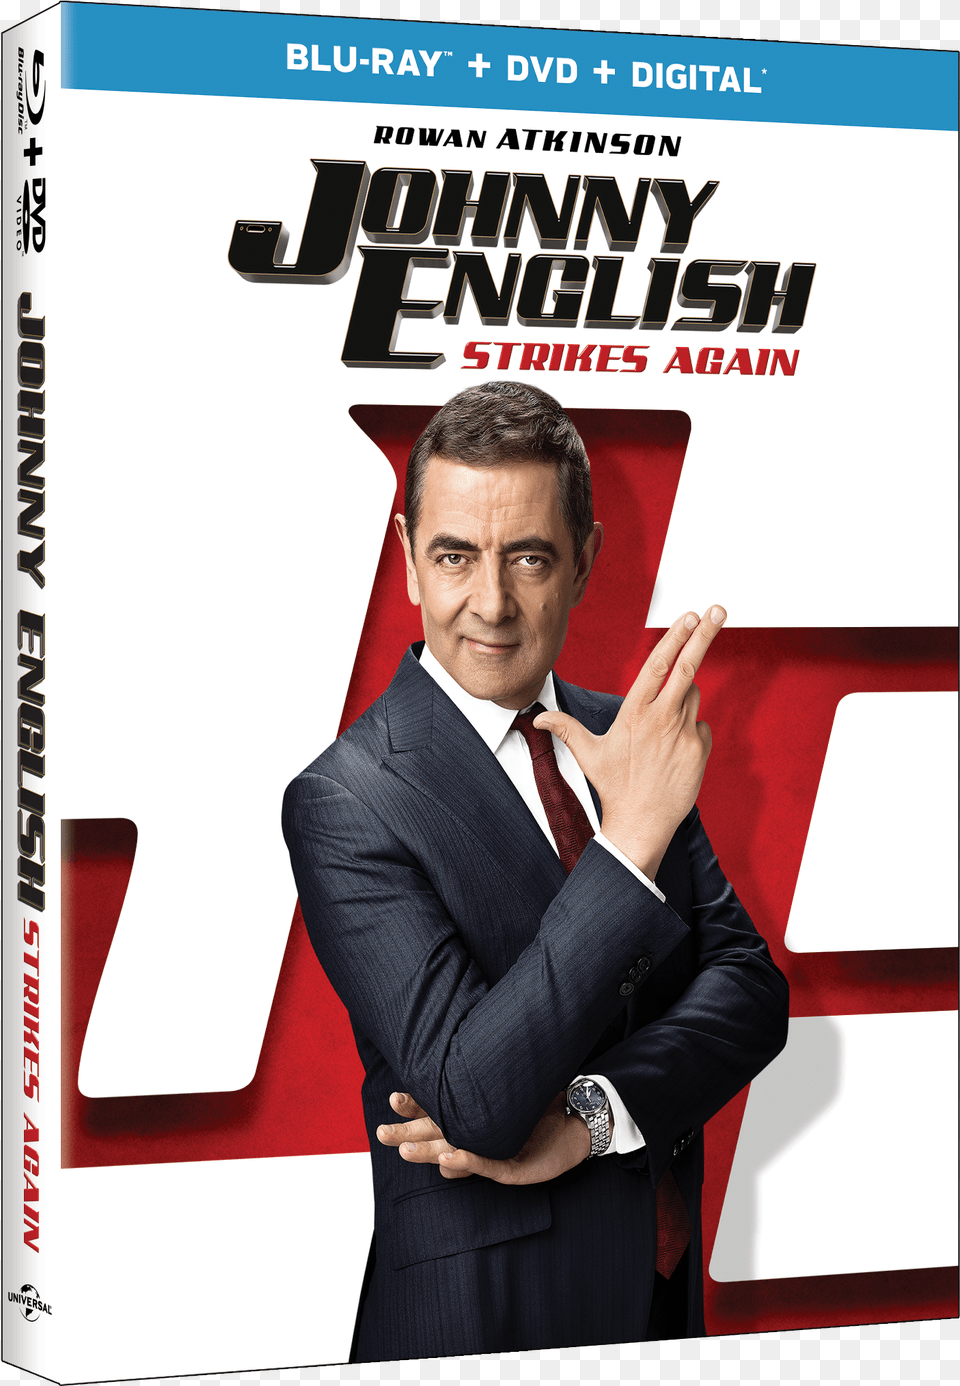 Johnny English Strikes Again Blu Ray Combo Pack Cover, Accessories, Formal Wear, Poster, Publication Png